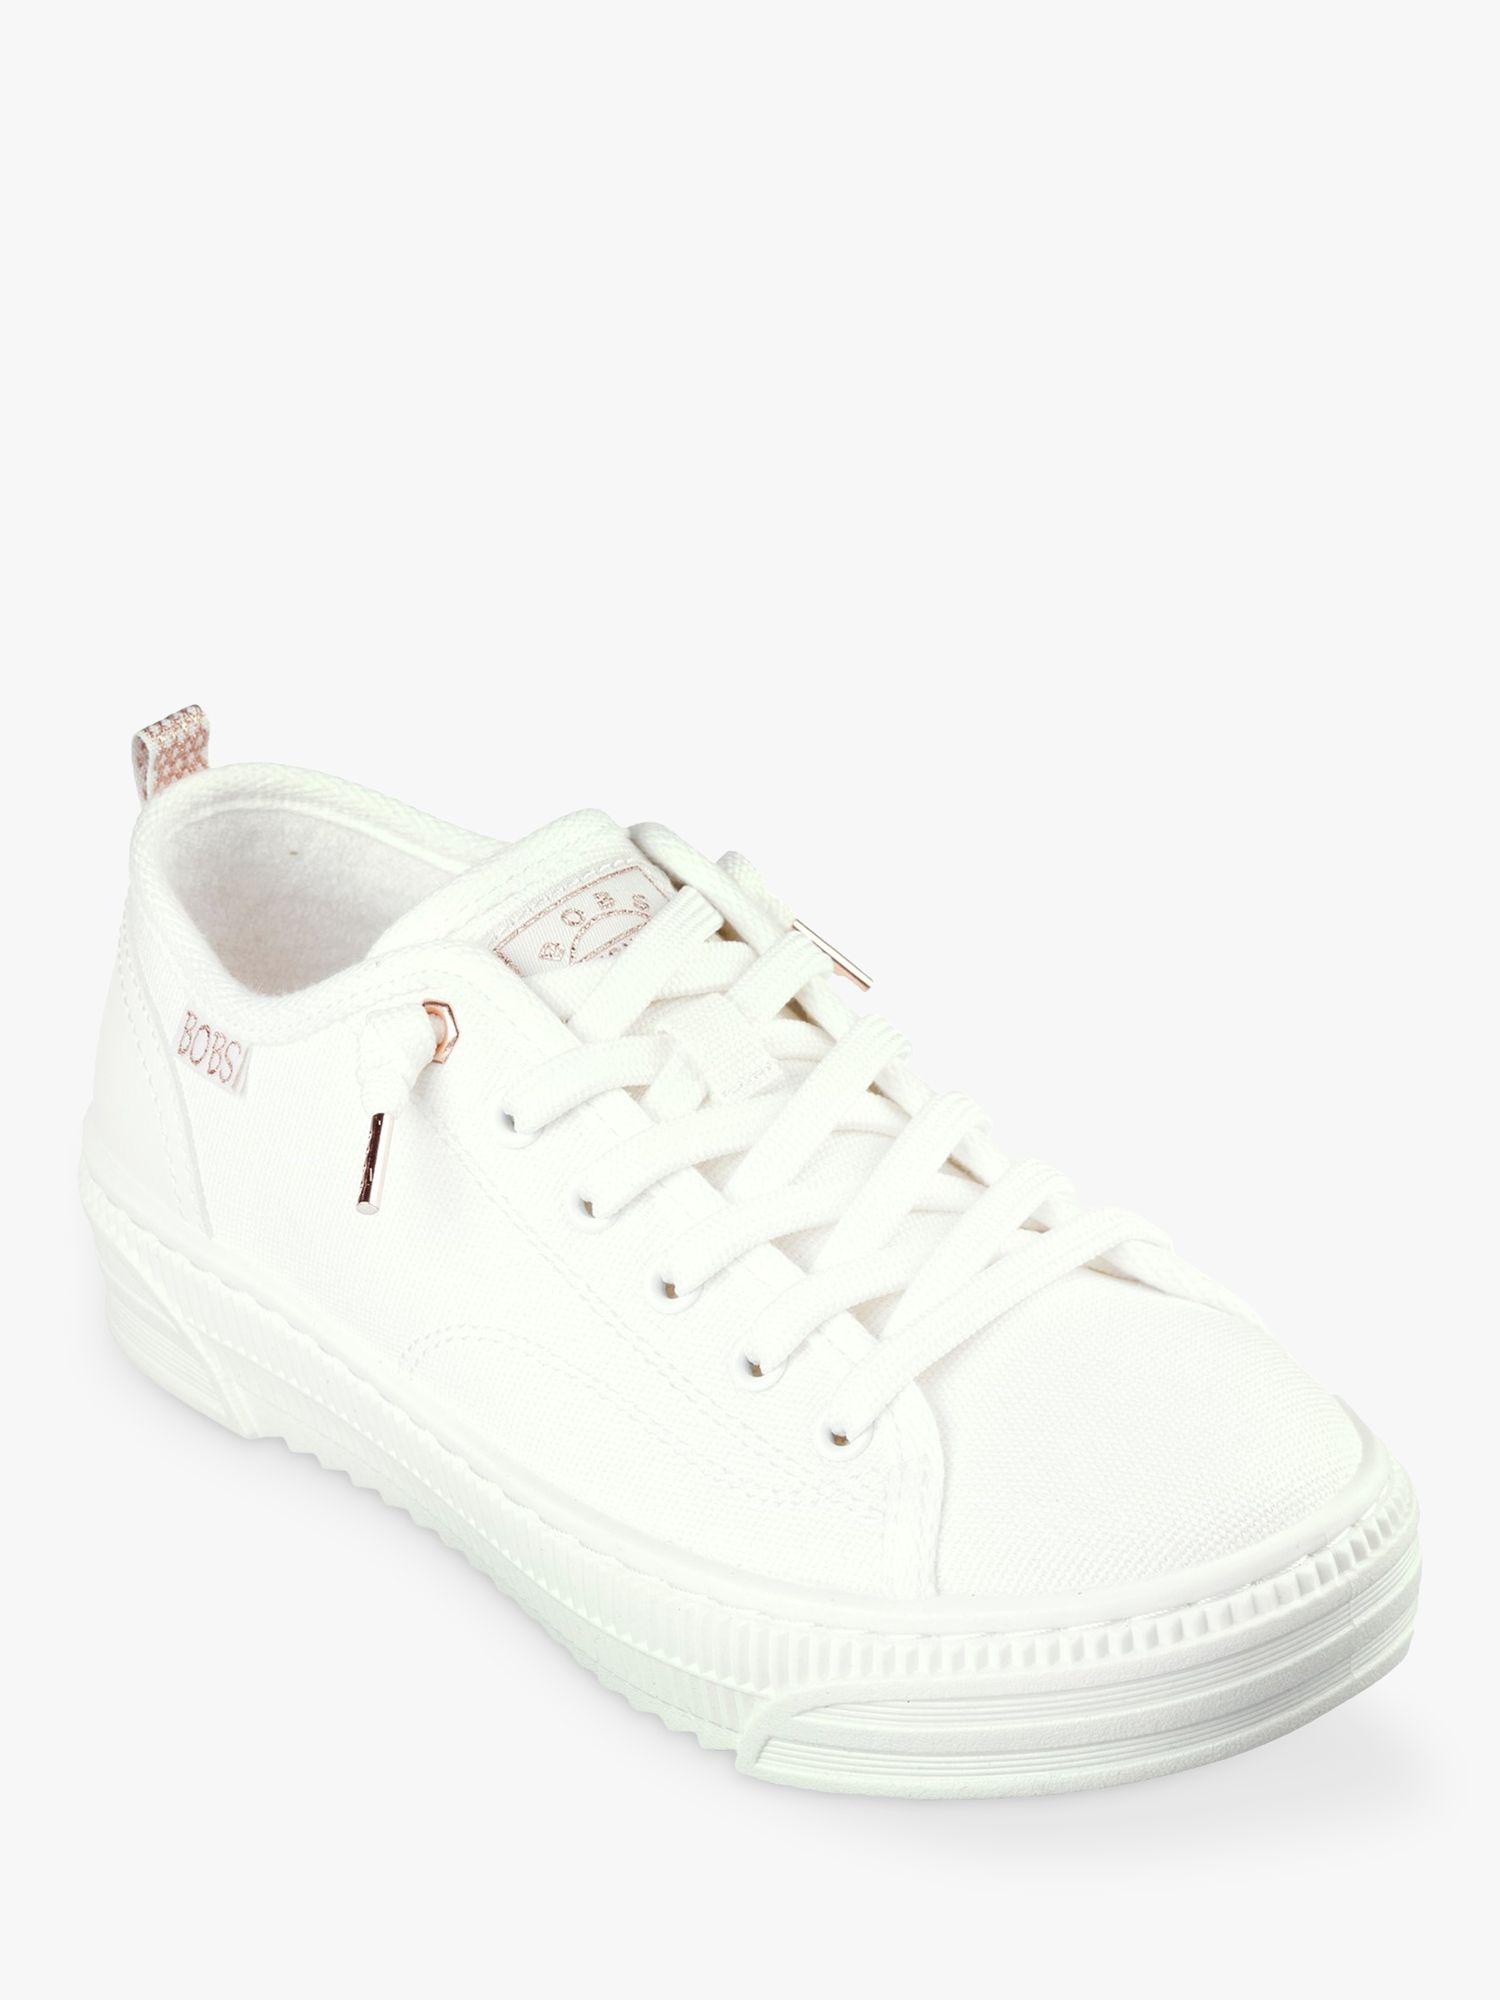 Buy Skechers BOBS Copa Chunky Trainers Online at johnlewis.com